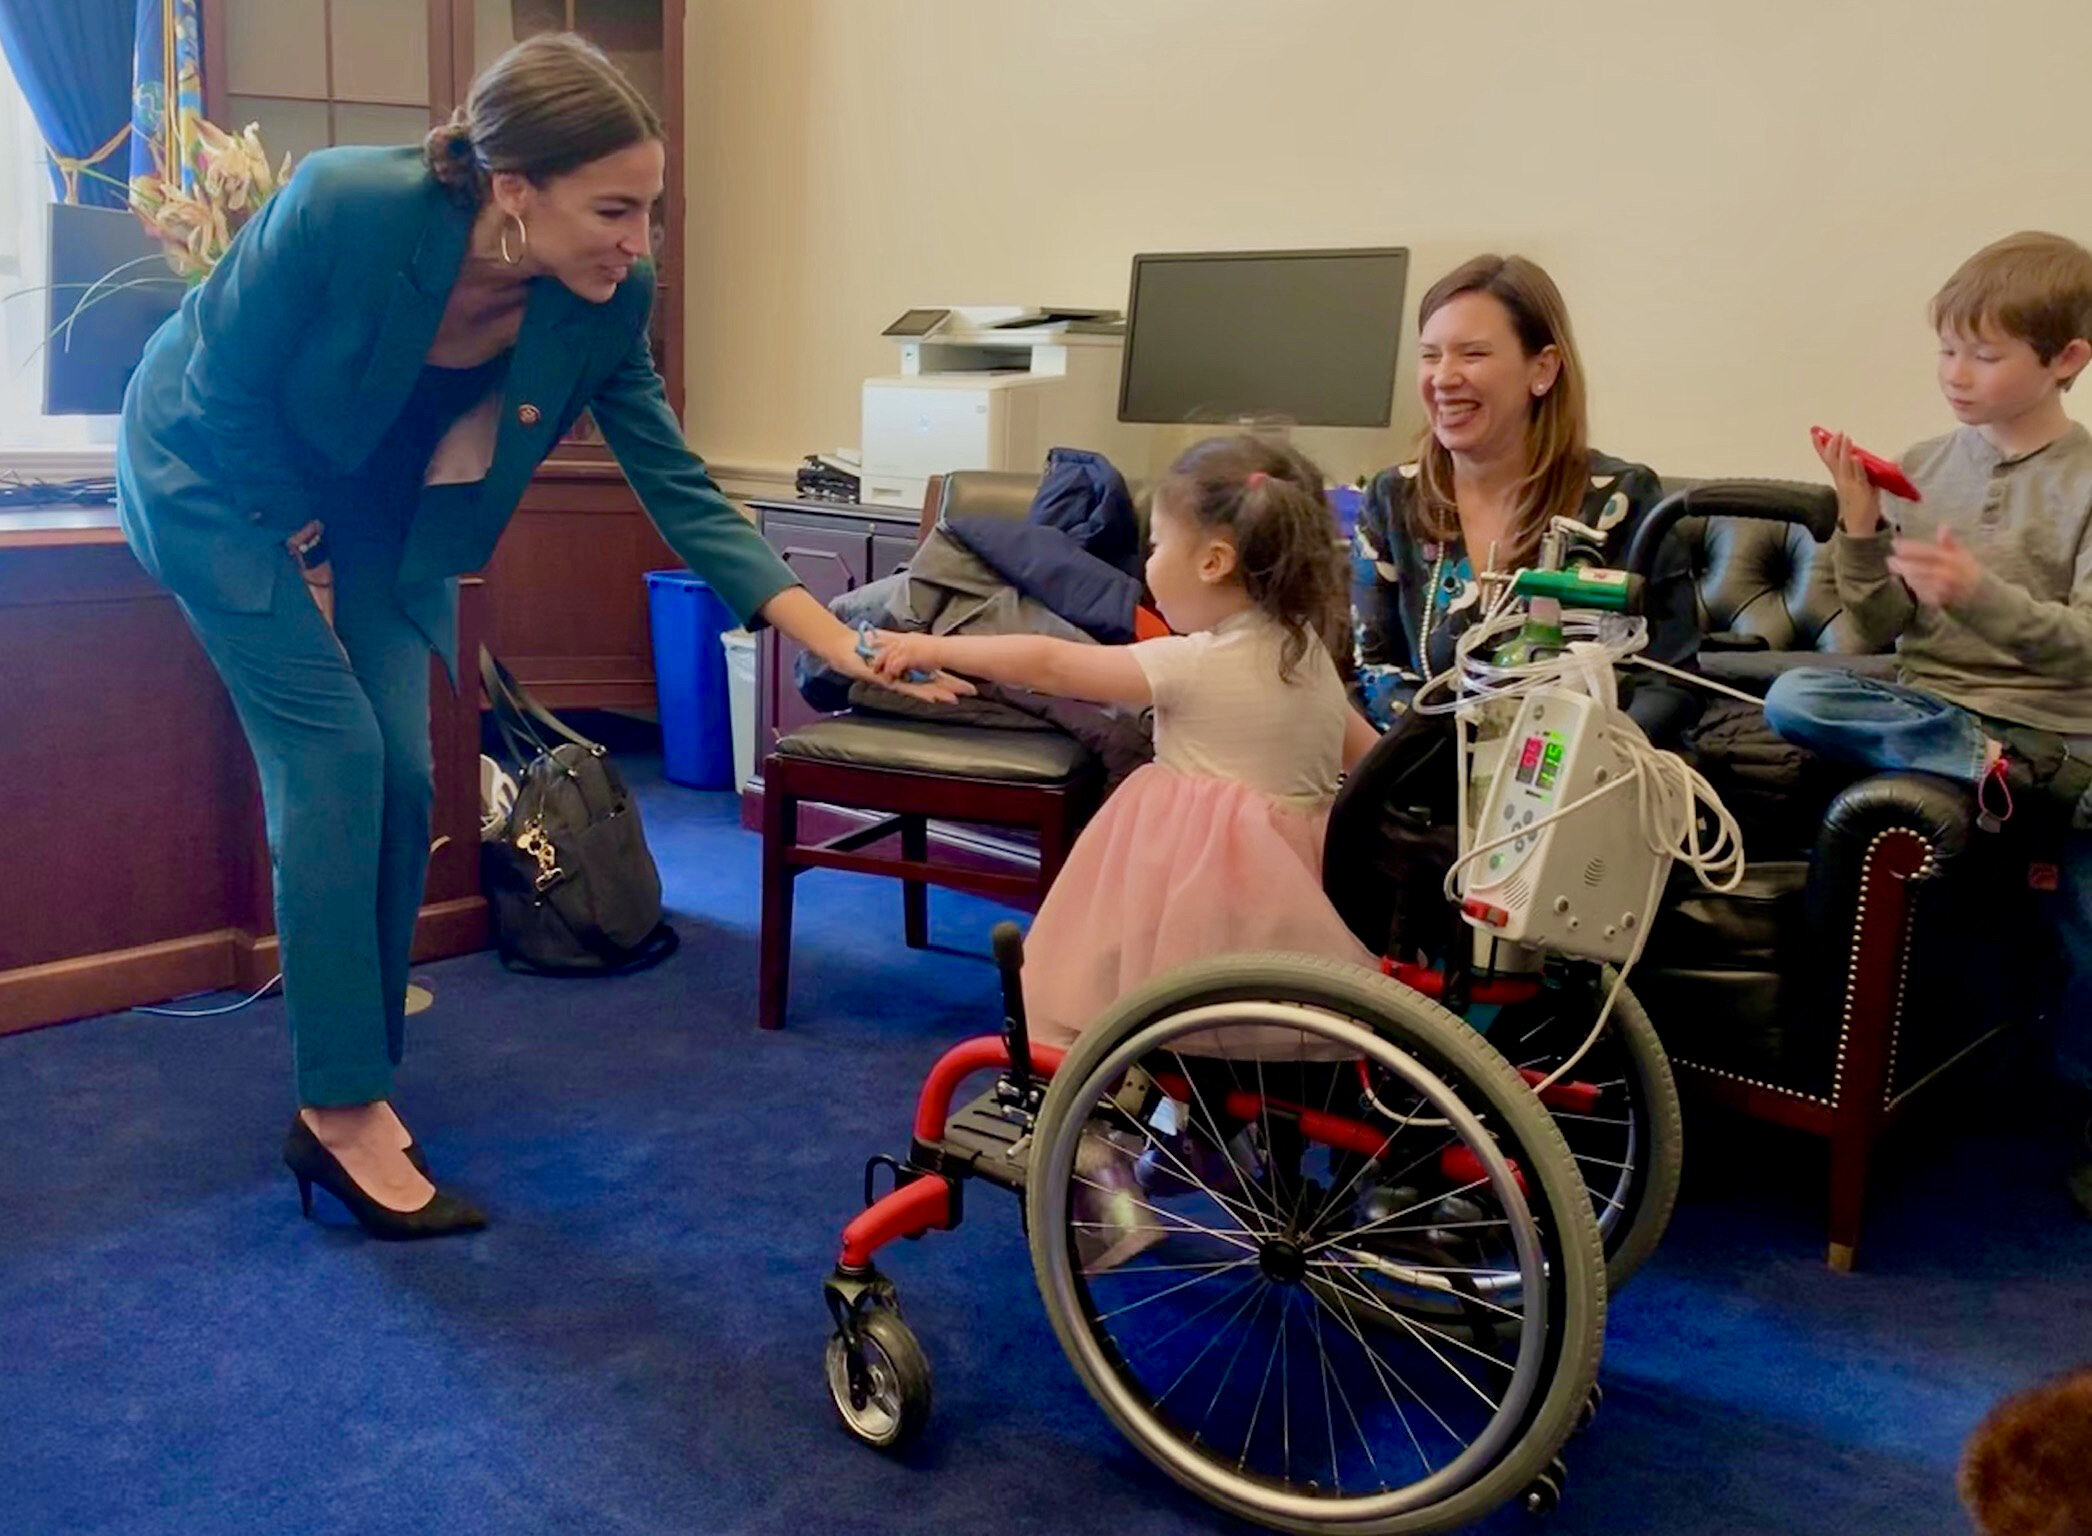  A new member of Congress wearing a vivid turquoise suit bends forward to grasp the hand of a Little Lobbyists child who reaches out to shake her hand. 